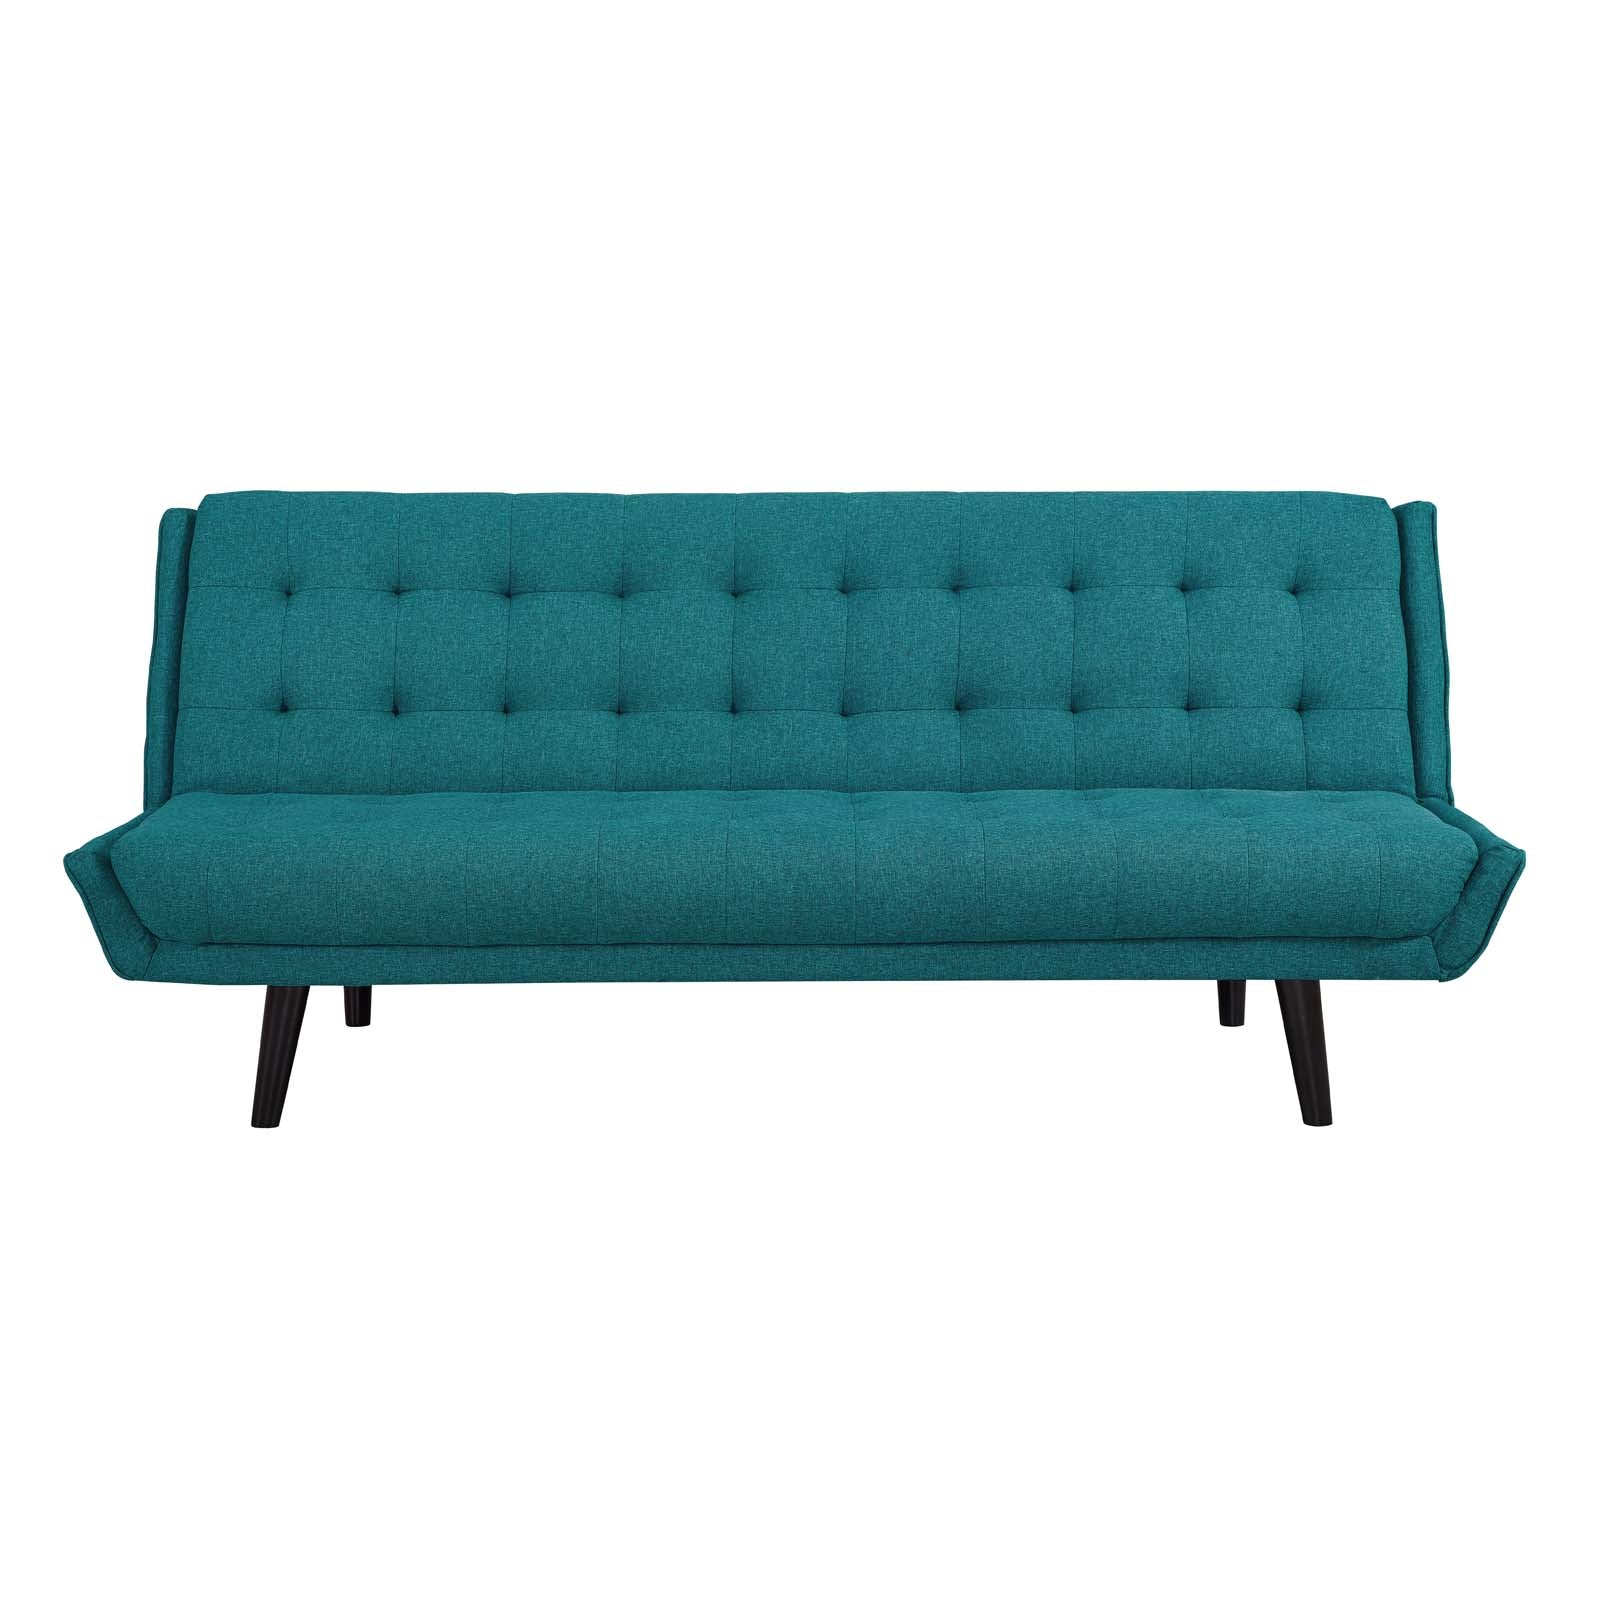 Glance Tufted Convertible Fabric Sofa Bed - East Shore Modern Home Furnishings